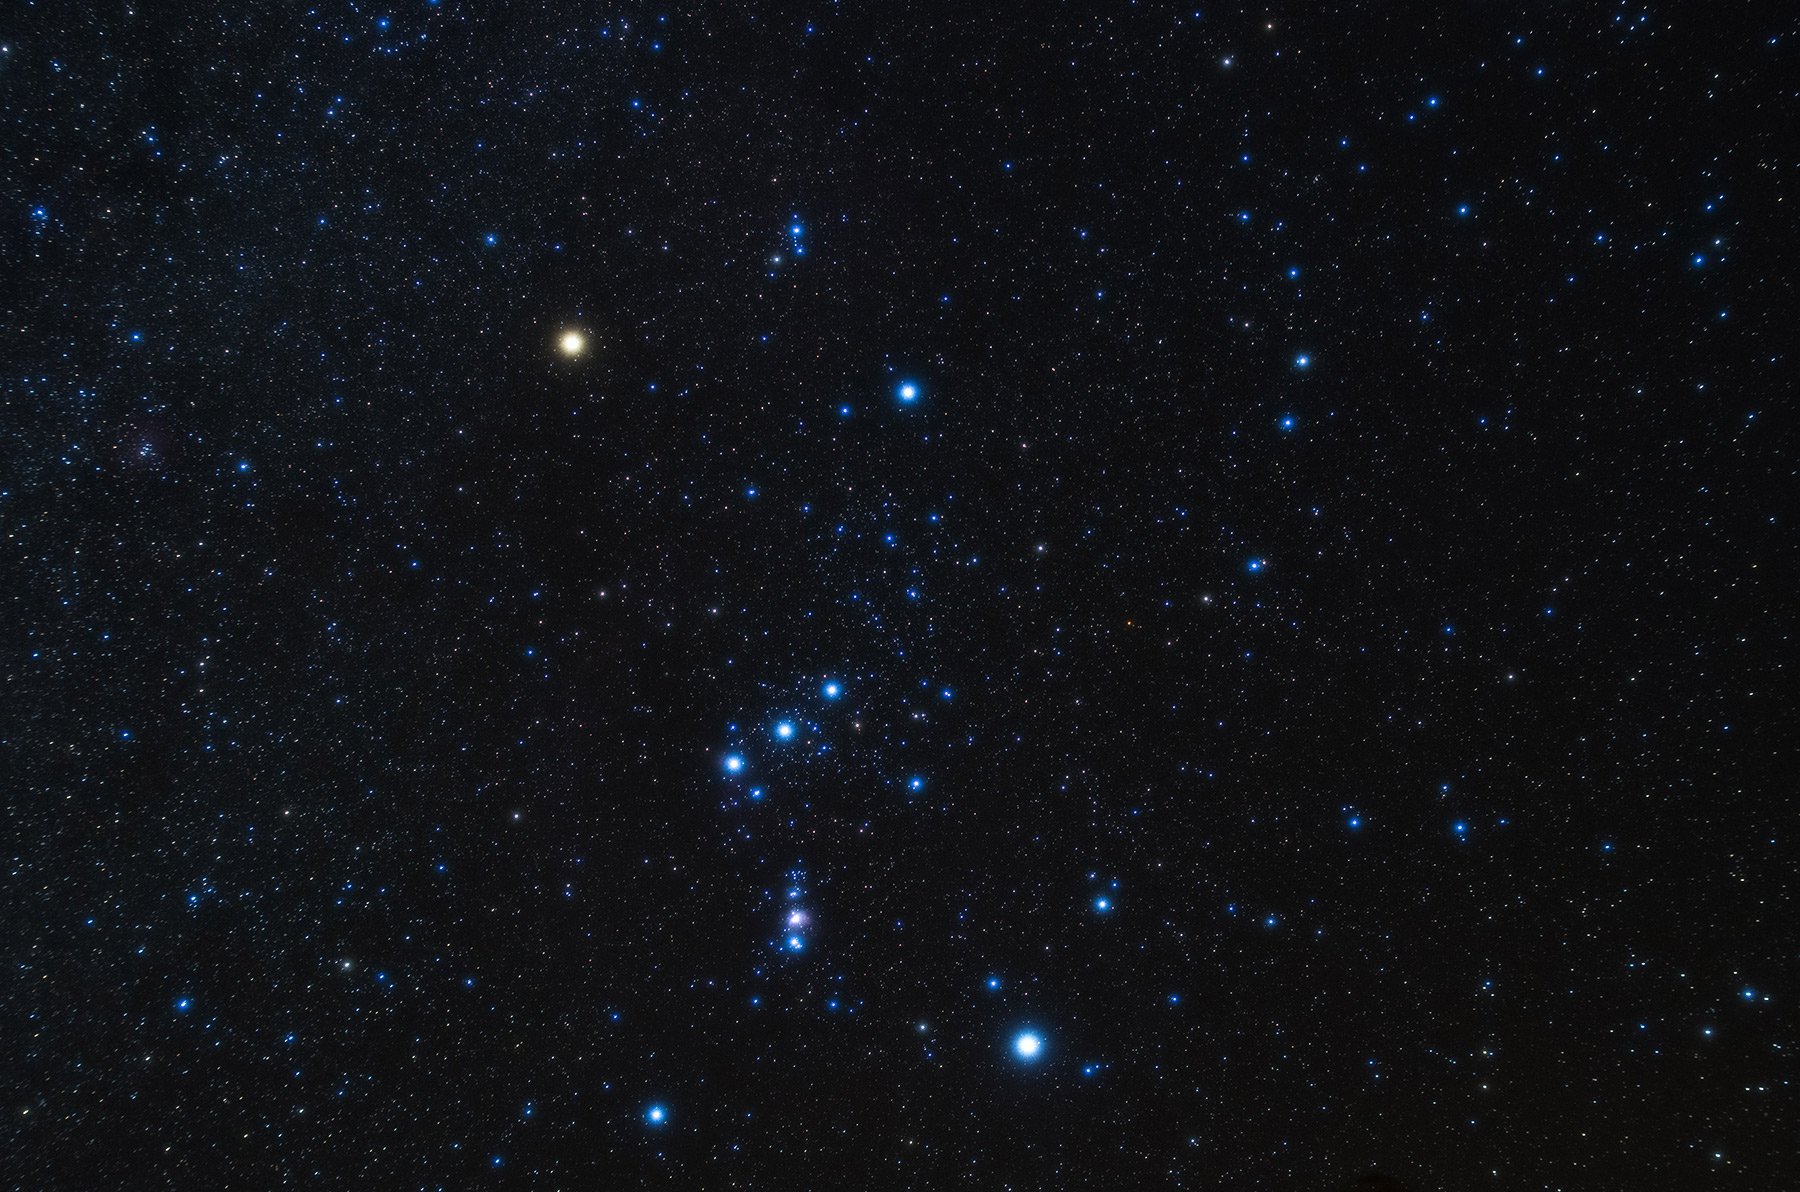 A photograph shows the stars that make up the constellation of Orion the Hunter